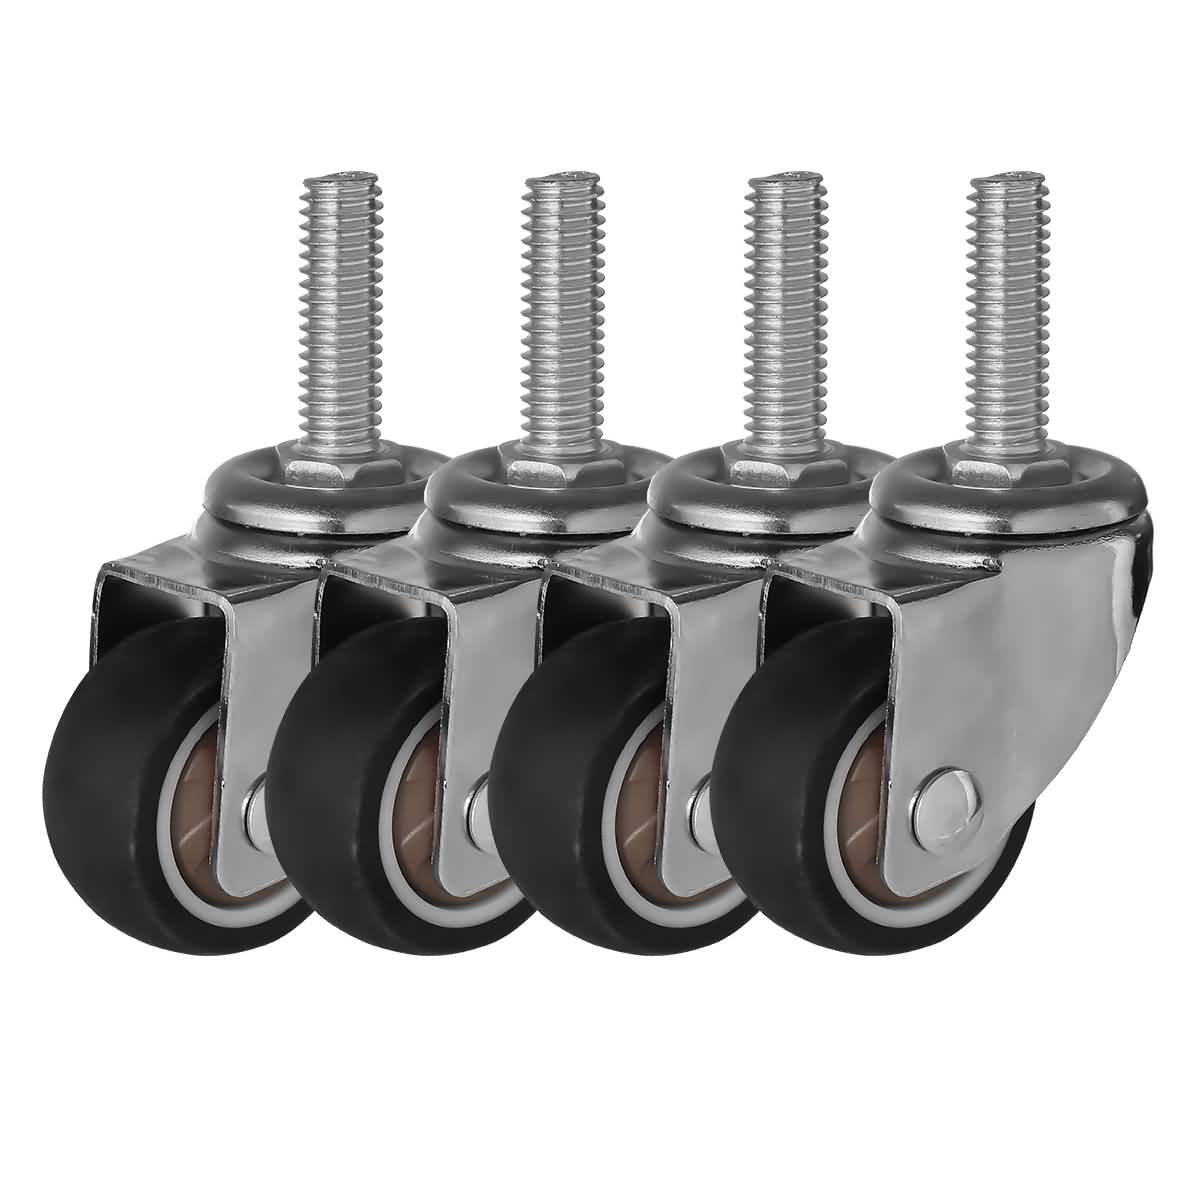 4 pack of 1/2”-13 threaded stem with 4 by 1-1/4” rubber wheels swivel casters 